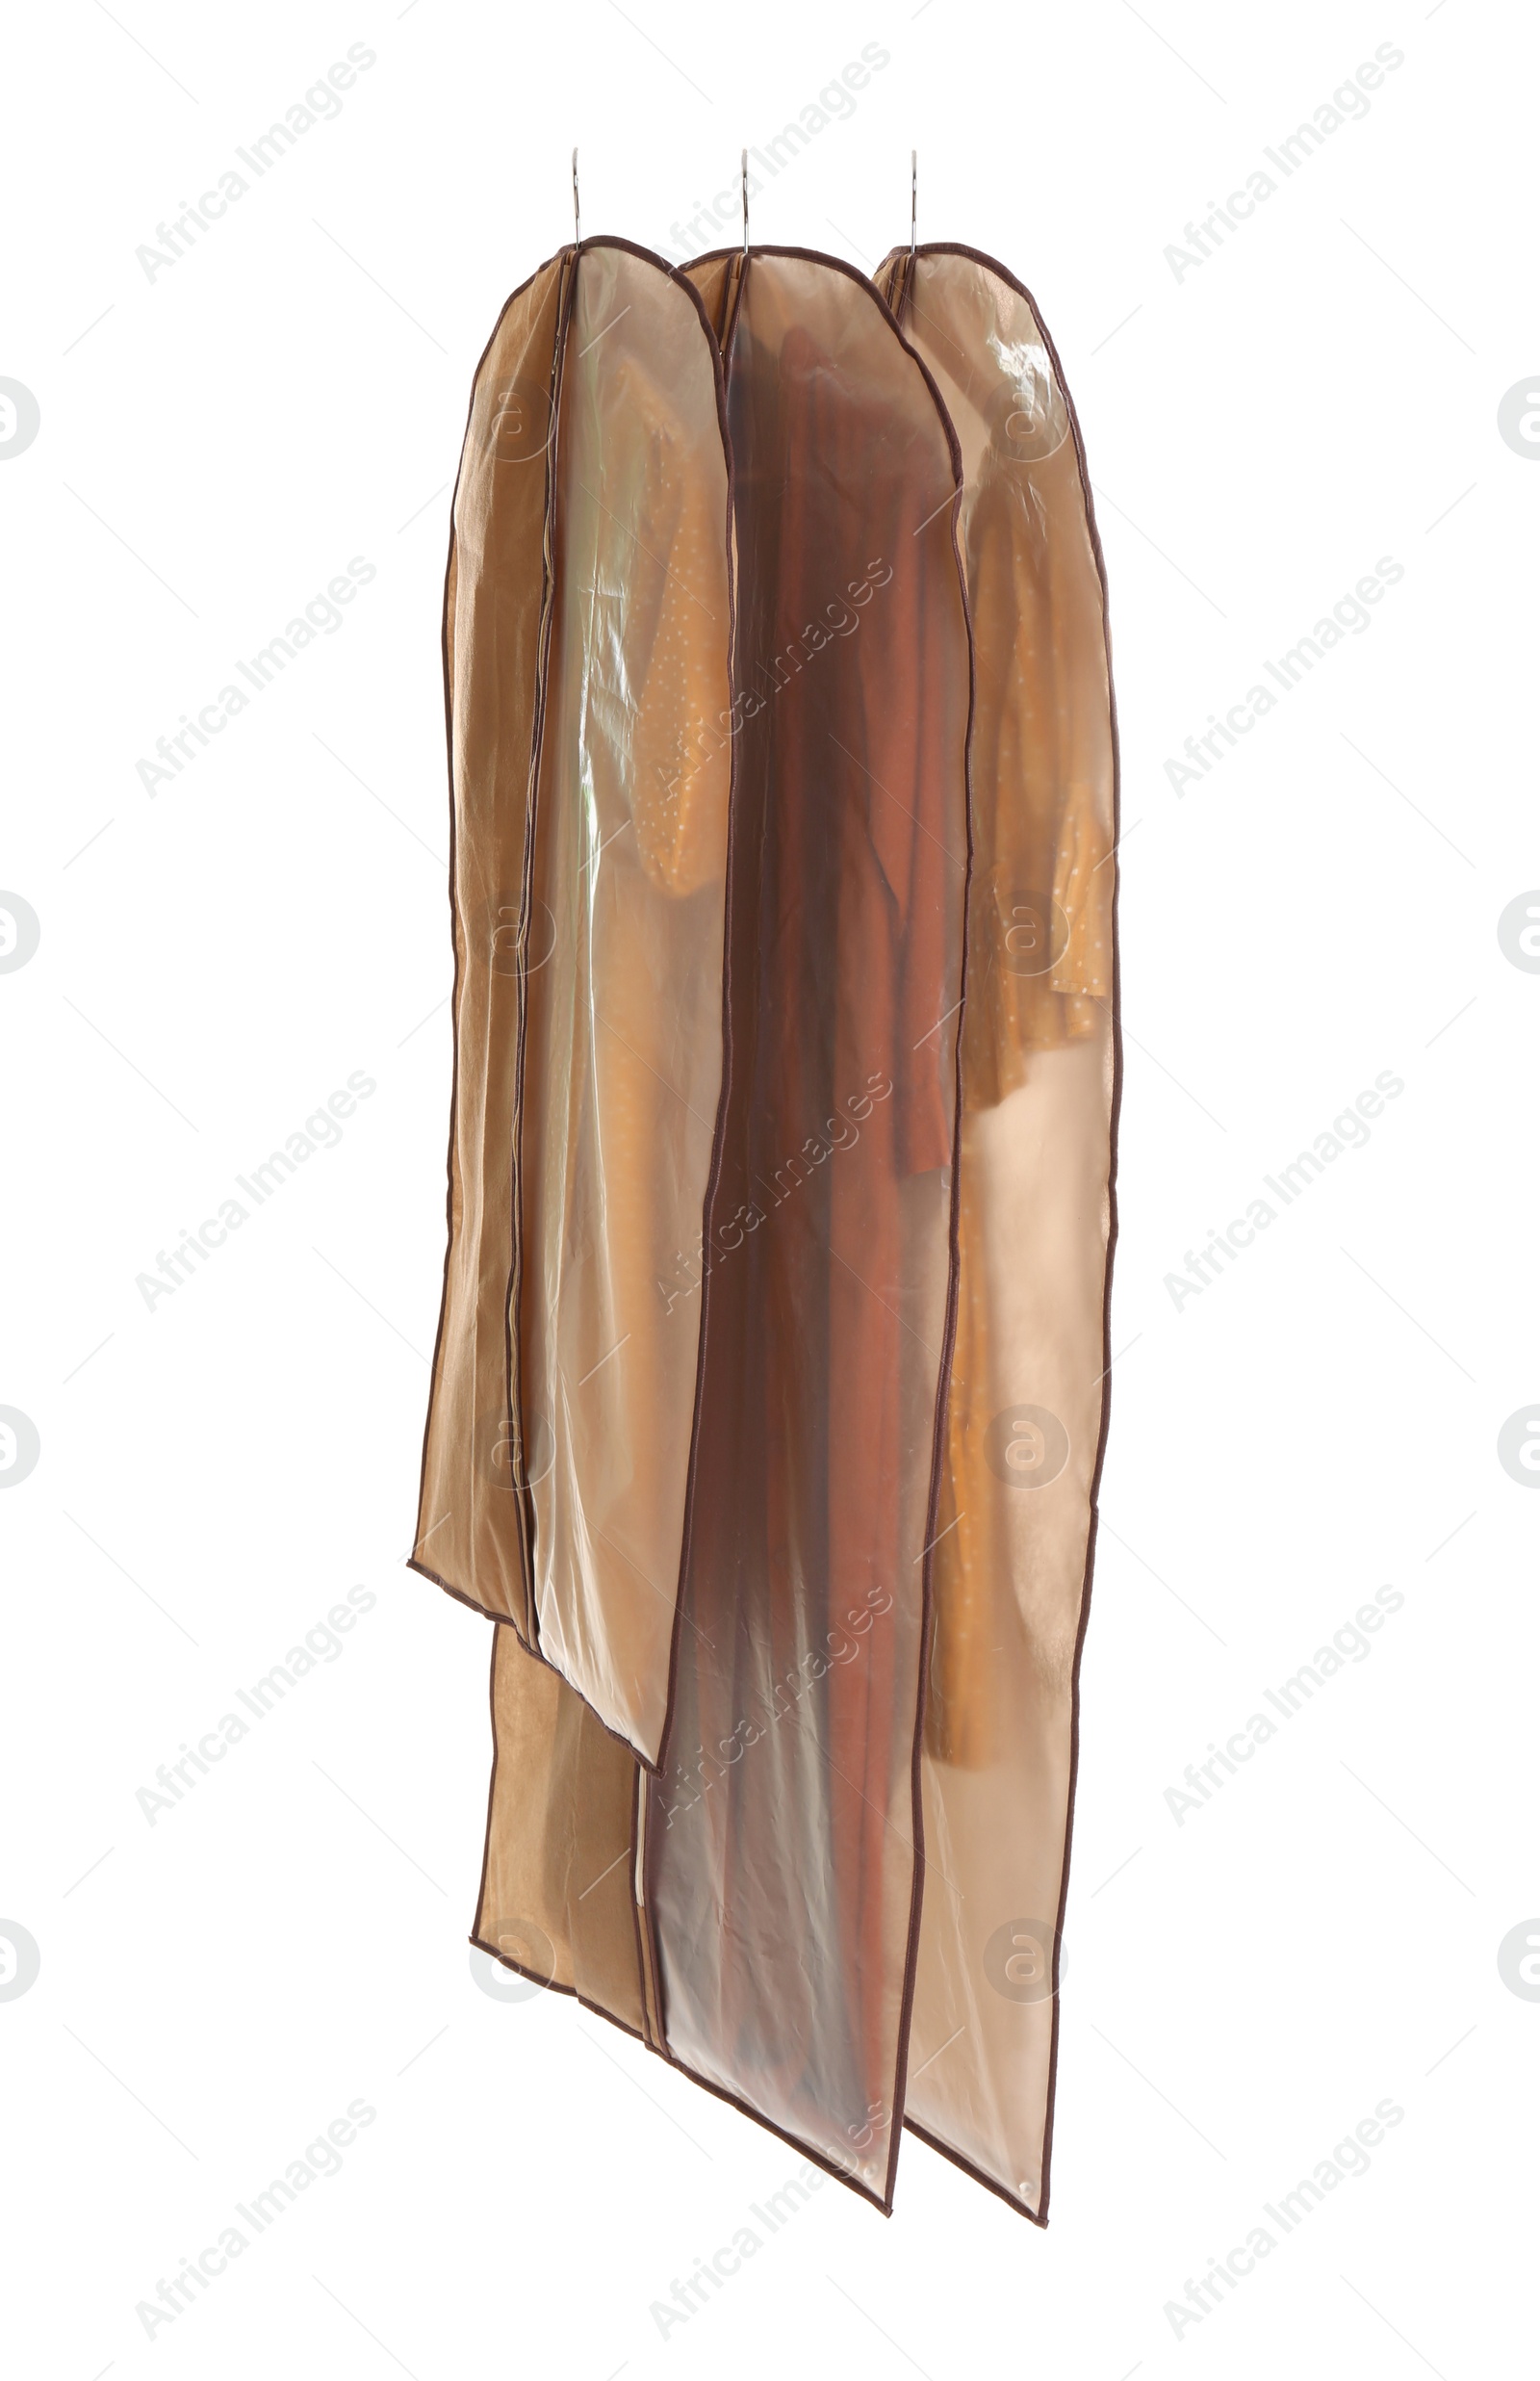 Photo of Garment bags with clothes on white background